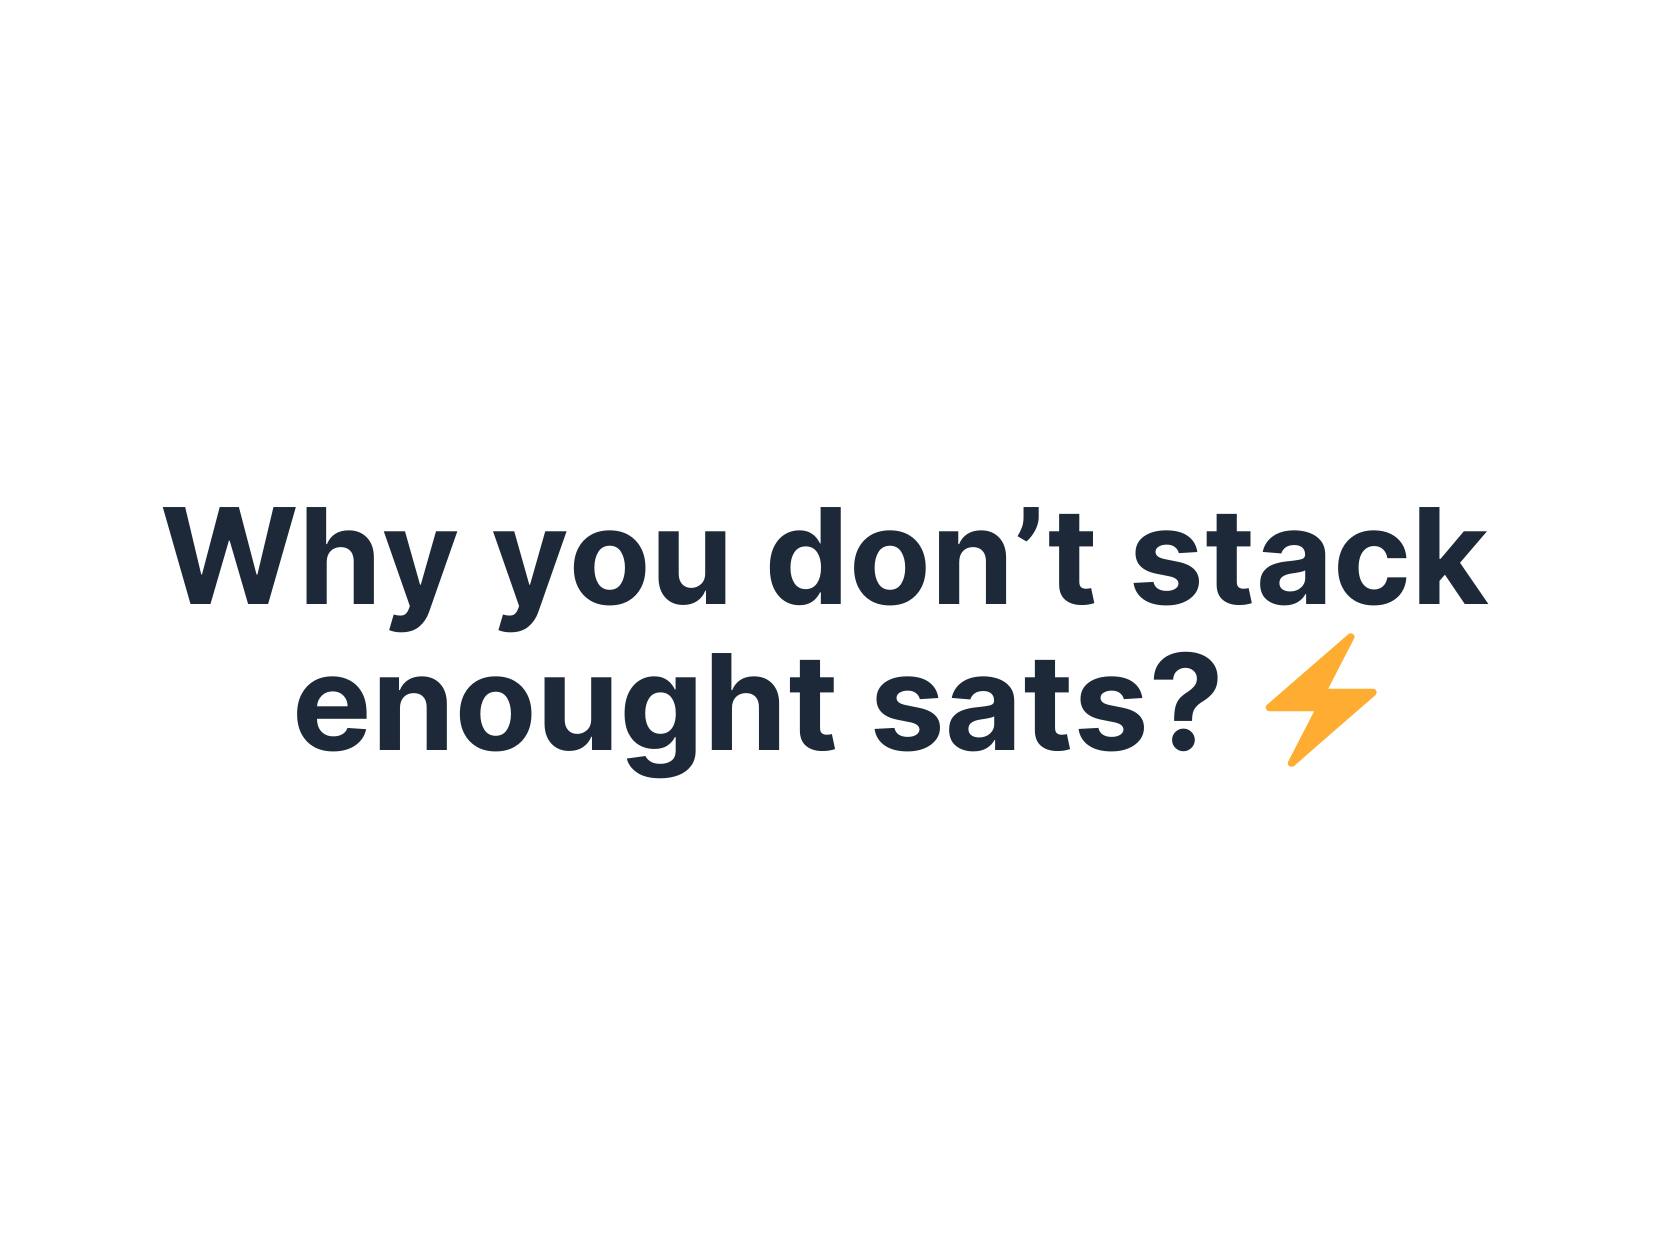 Why you don’t stack enought sats?